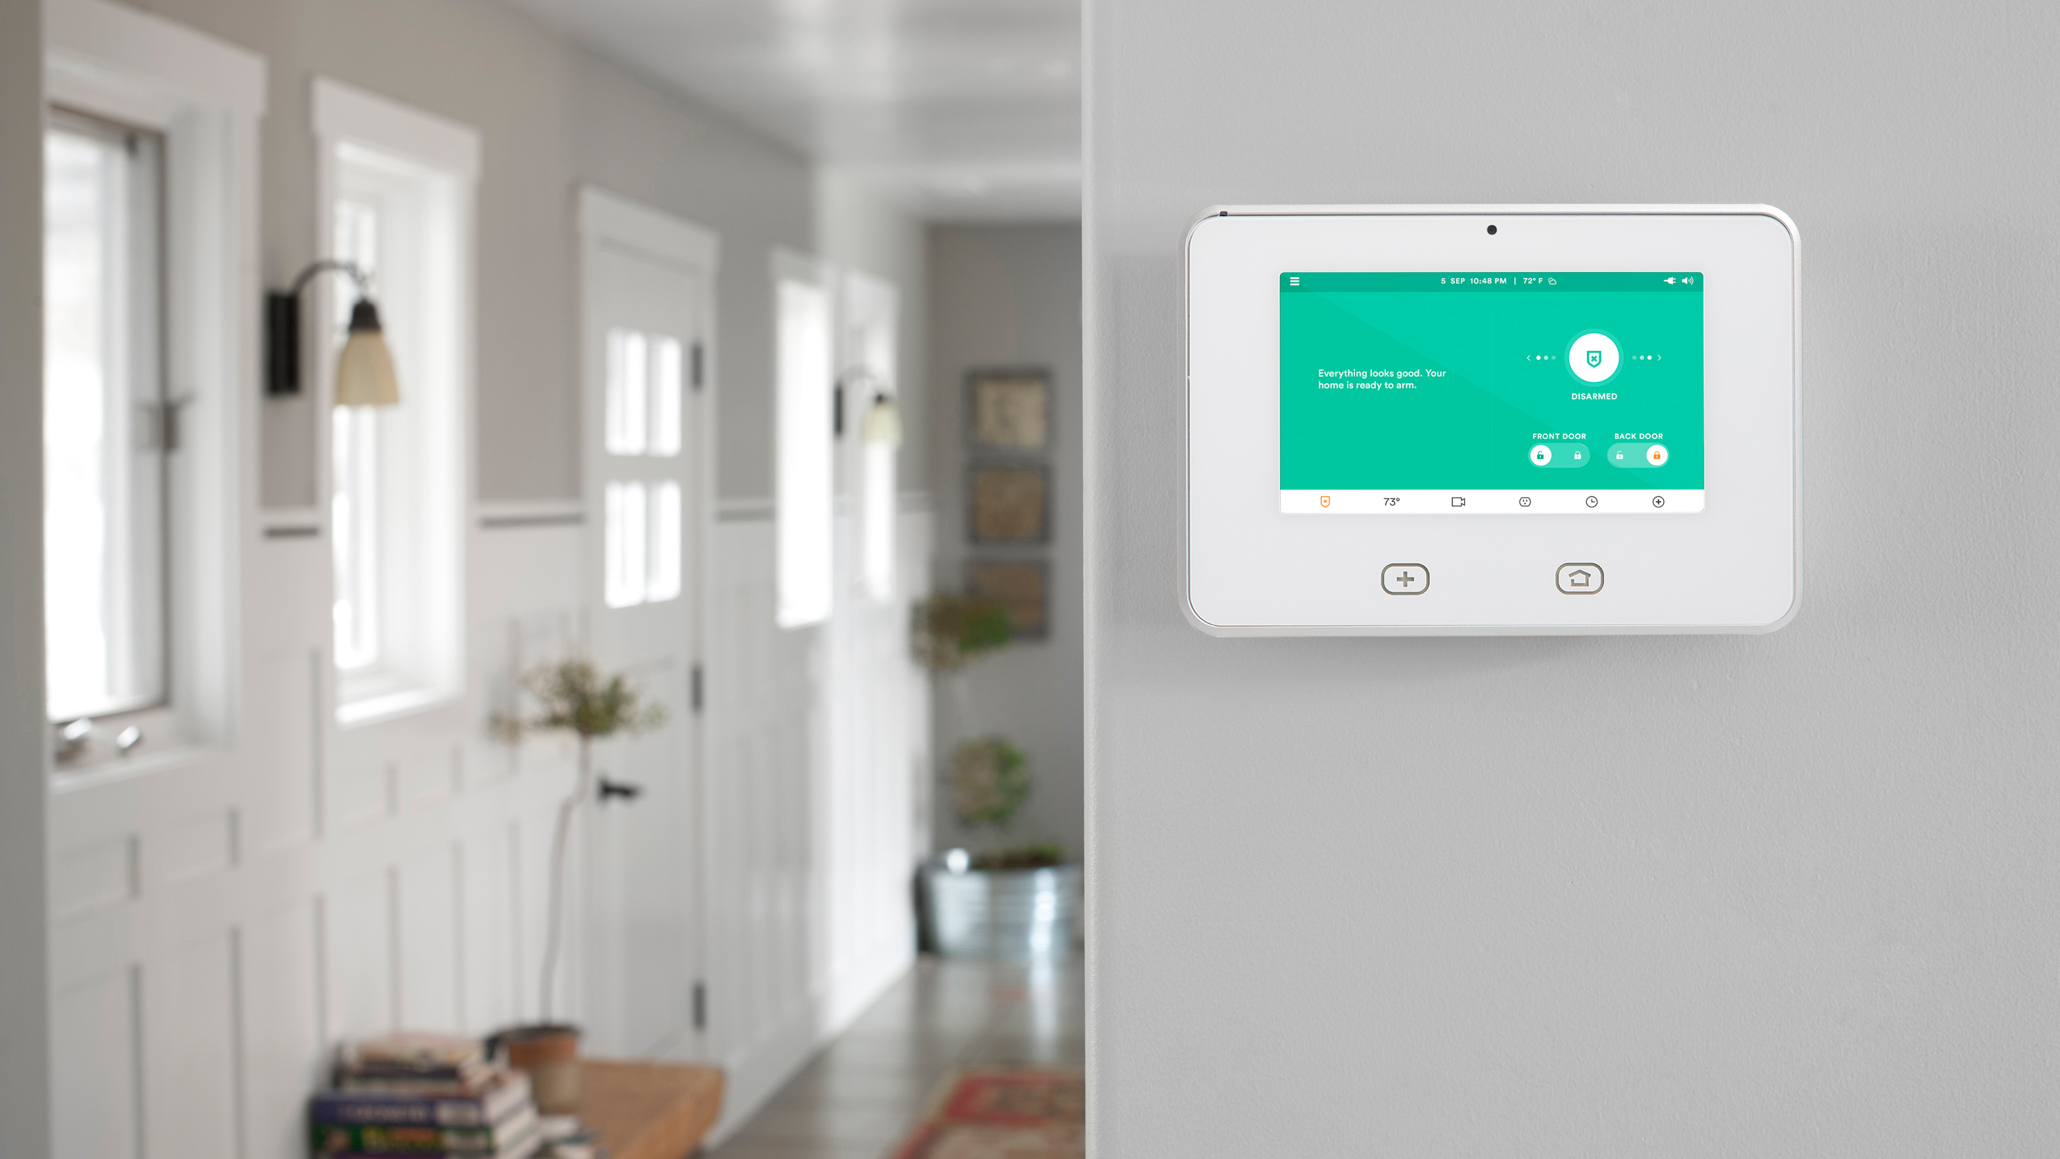 Central home automation control systems can take the form of smartphone apps or dedicated wall-mounted panels. In this Vivint-equipped home, the company's SkyControl Panel integrates multiple safety, security, and convenience features. Image: Vivint.